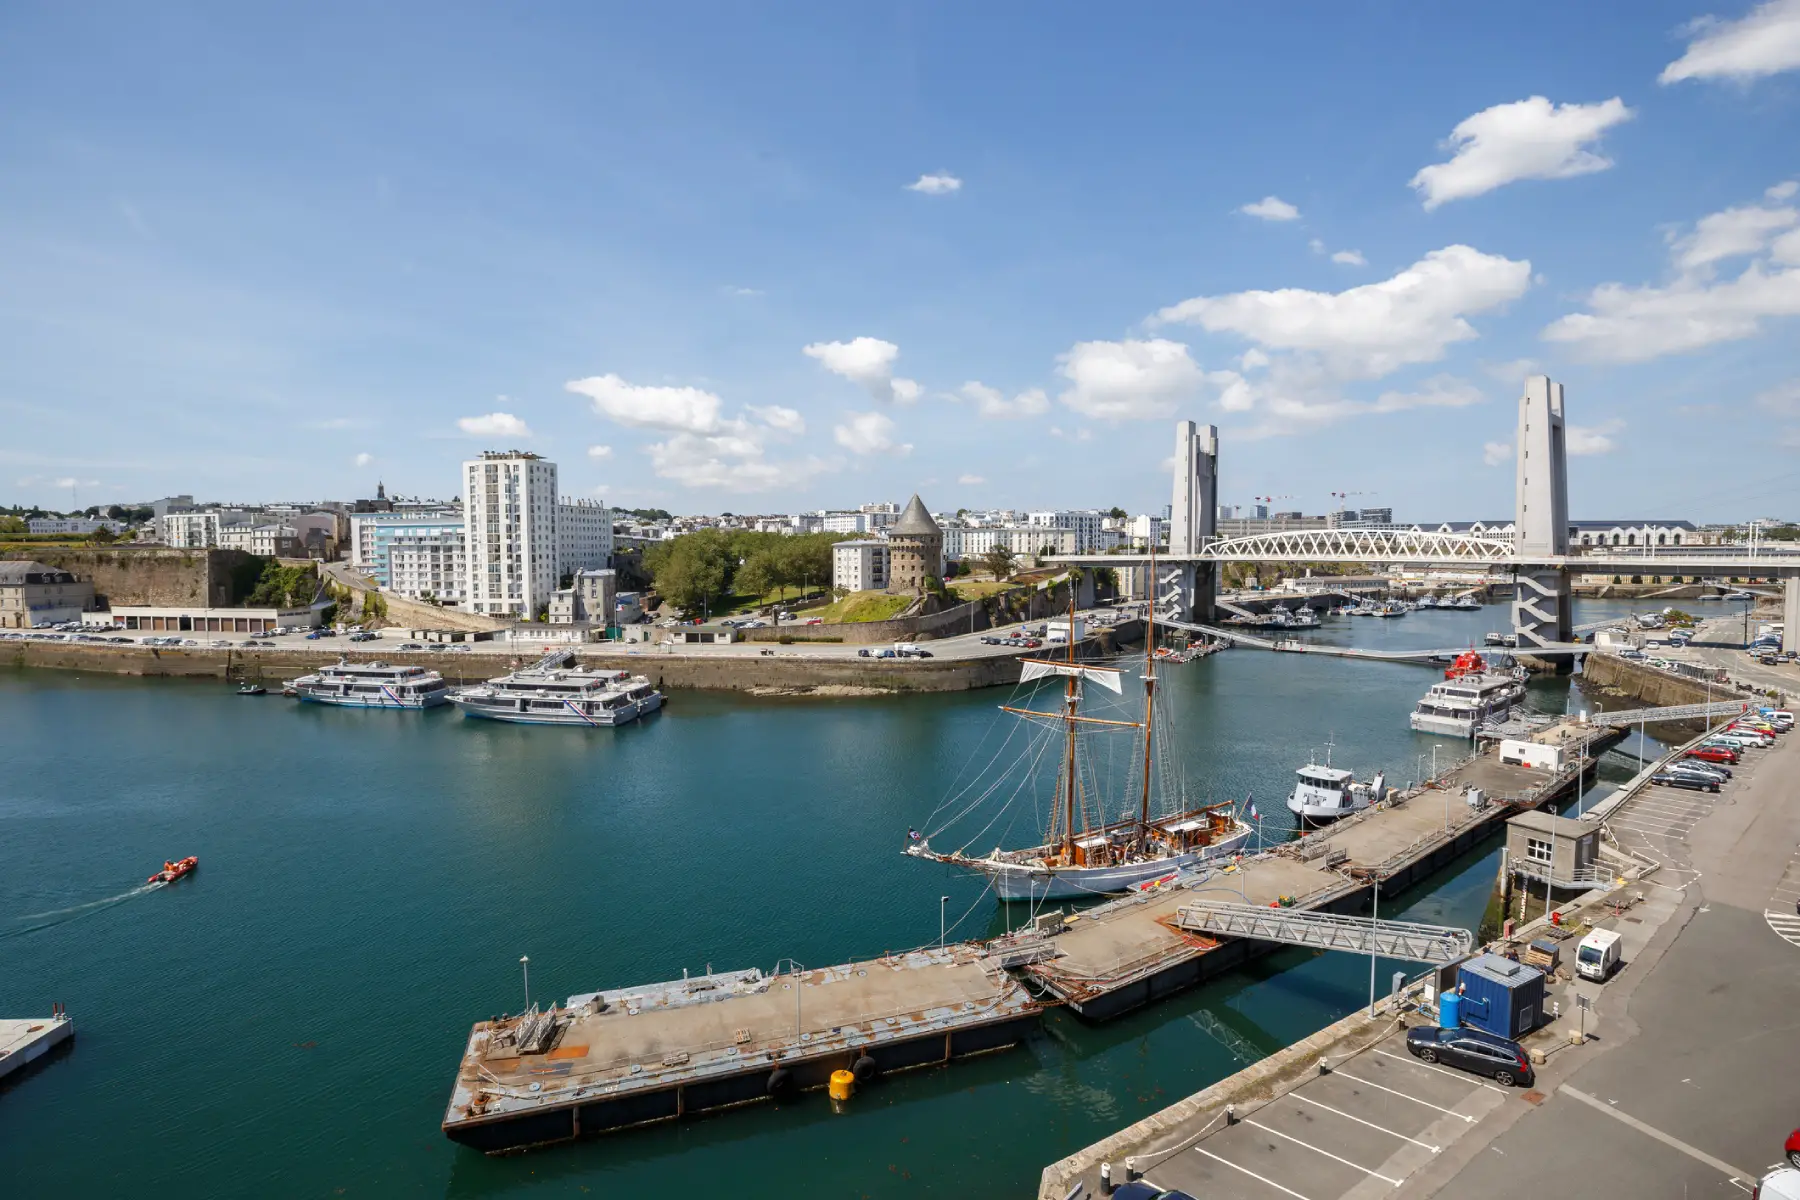 a view of the cityscape in Brest on a clear sunny day with boats lining the harbor and tall building in the background